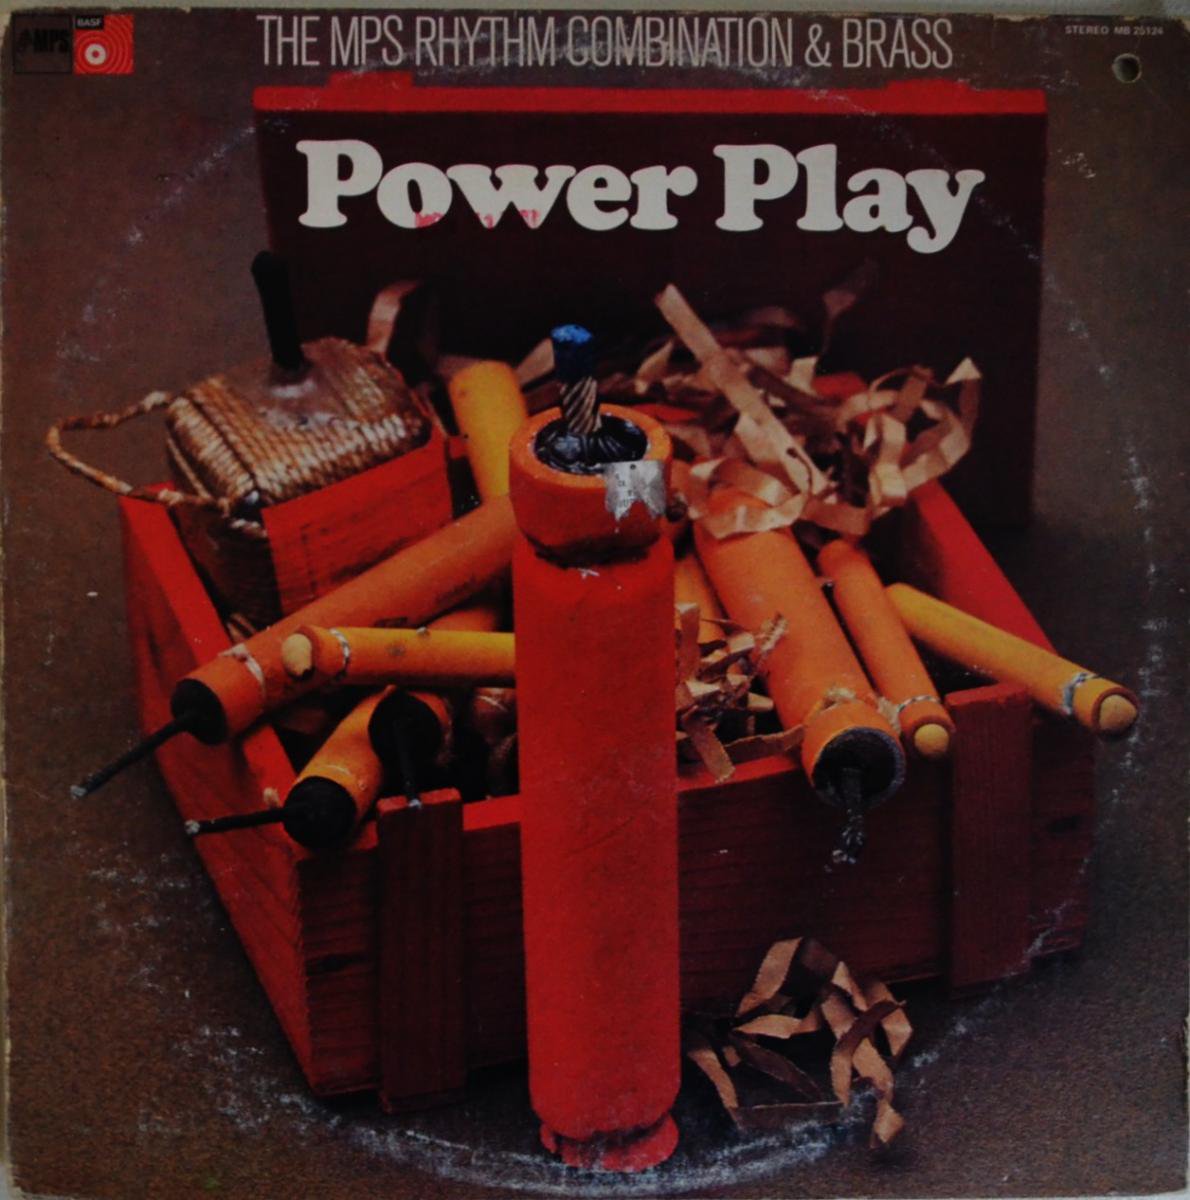 THE MPS RHYTHM COMBINATION & BRASS / POWER PLAY (LP)